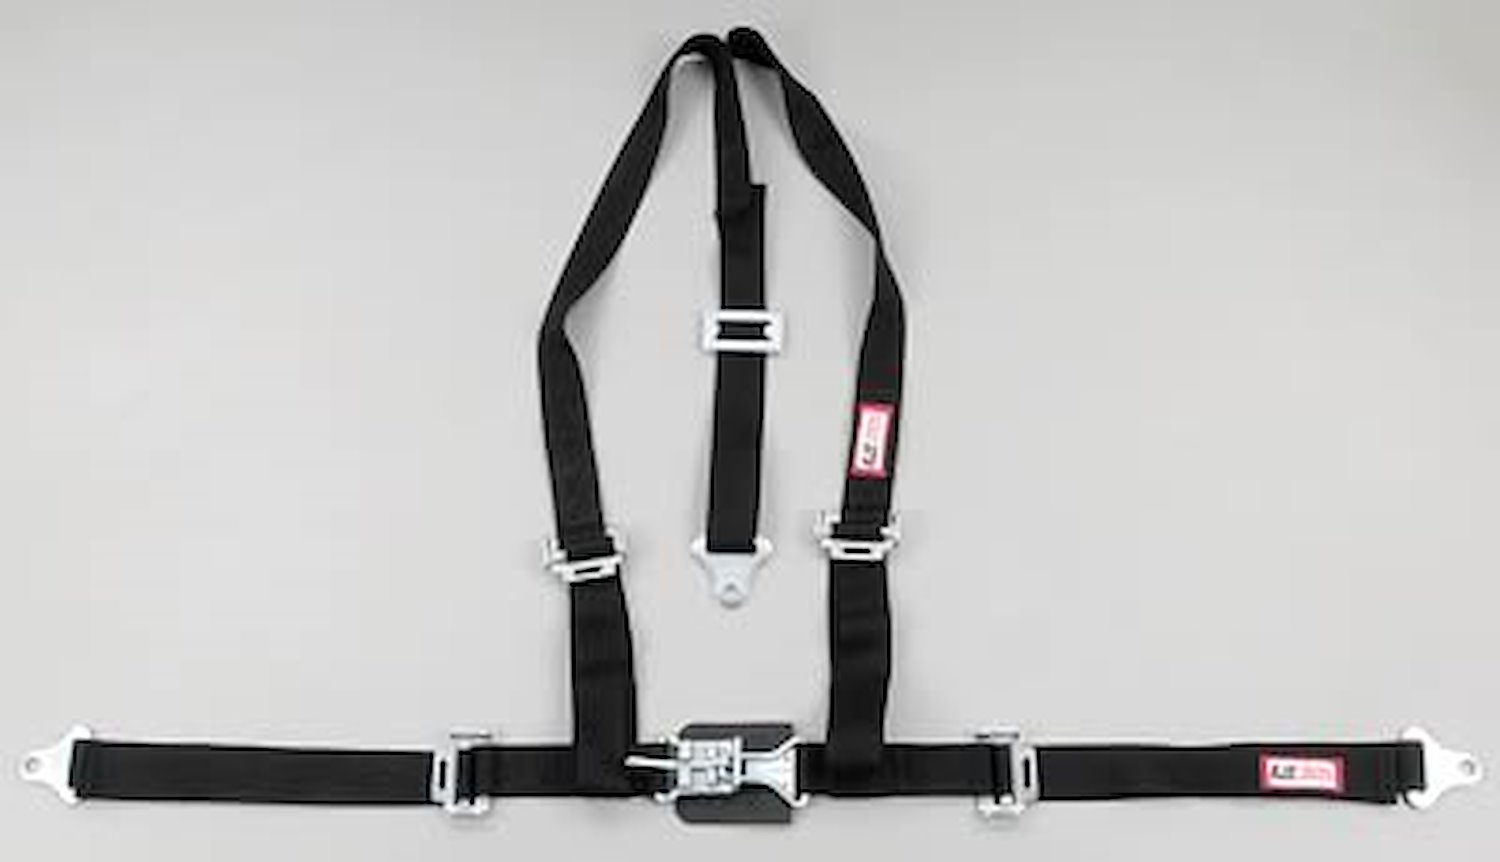 NON-SFI L&L HARNESS 3 PULL DOWN Lap BELT SNAP SEWN IN 2 S.H. Y FLOOR Mount WRAP/SNAP BLACK